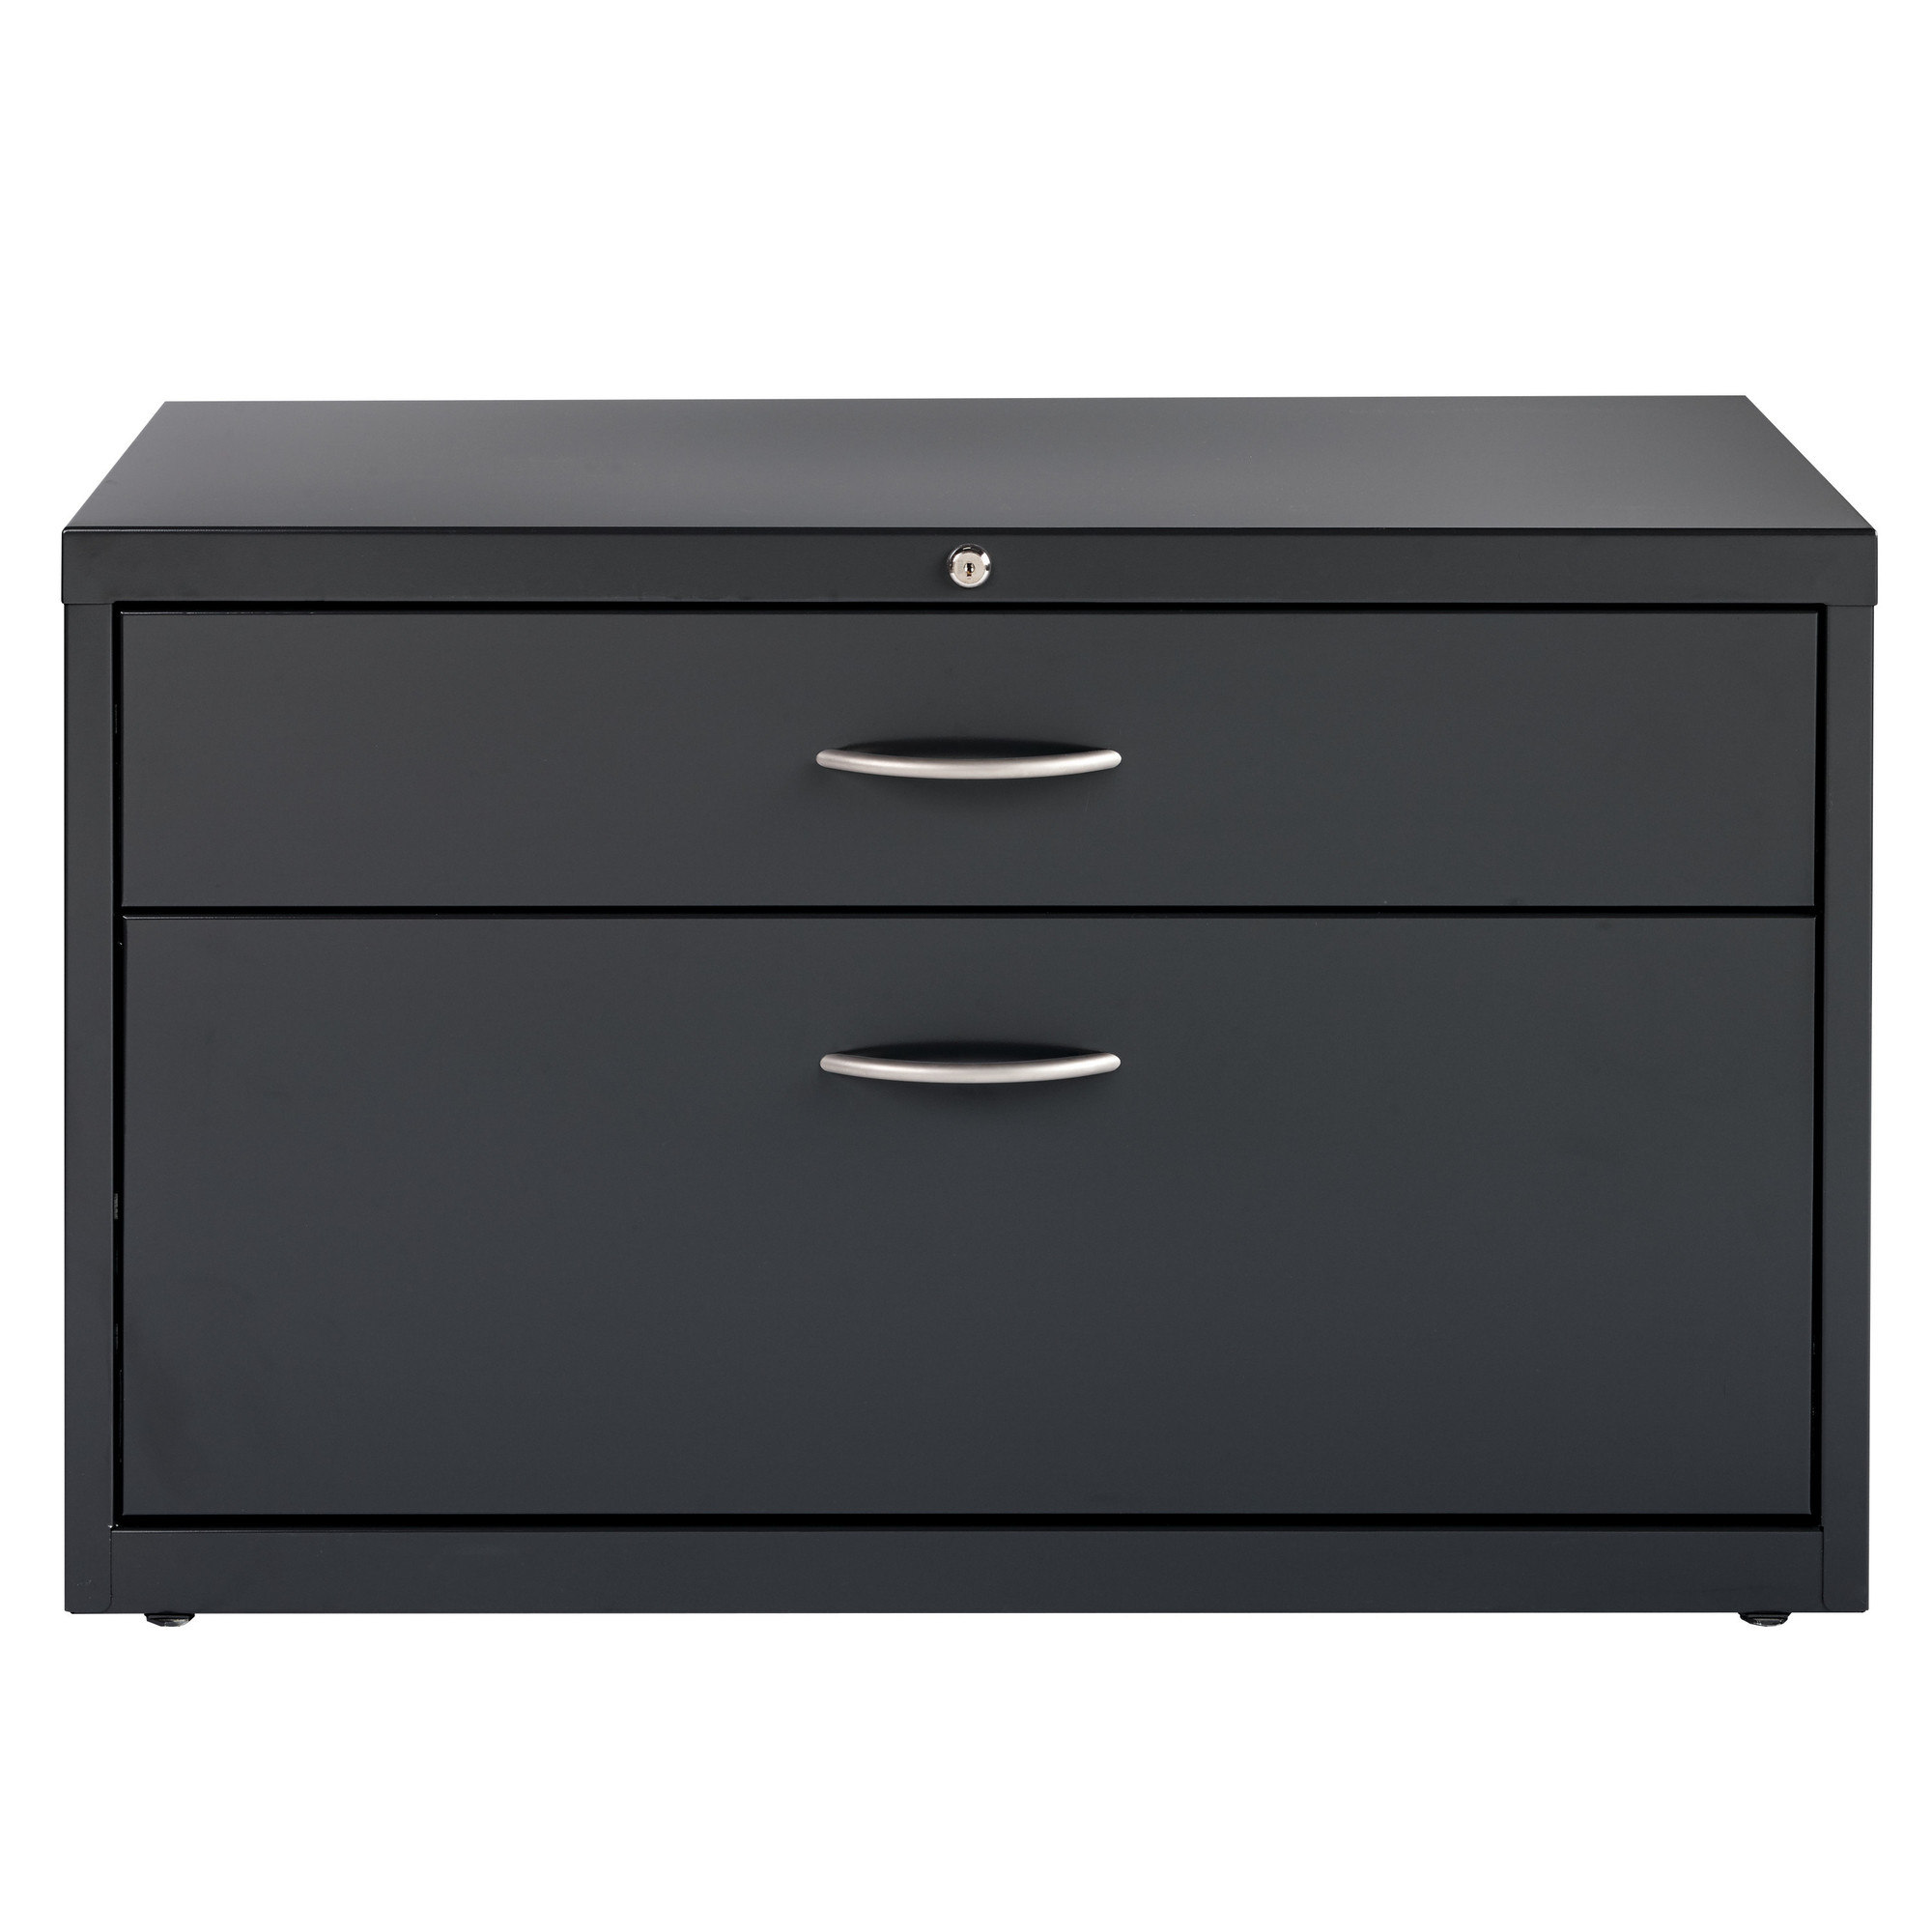 Hirsh Industries, 2 Drawer Credenza Lateral File Cabinet, Width 36 in, Depth 18.625 in, Height 22 in, Model 20505